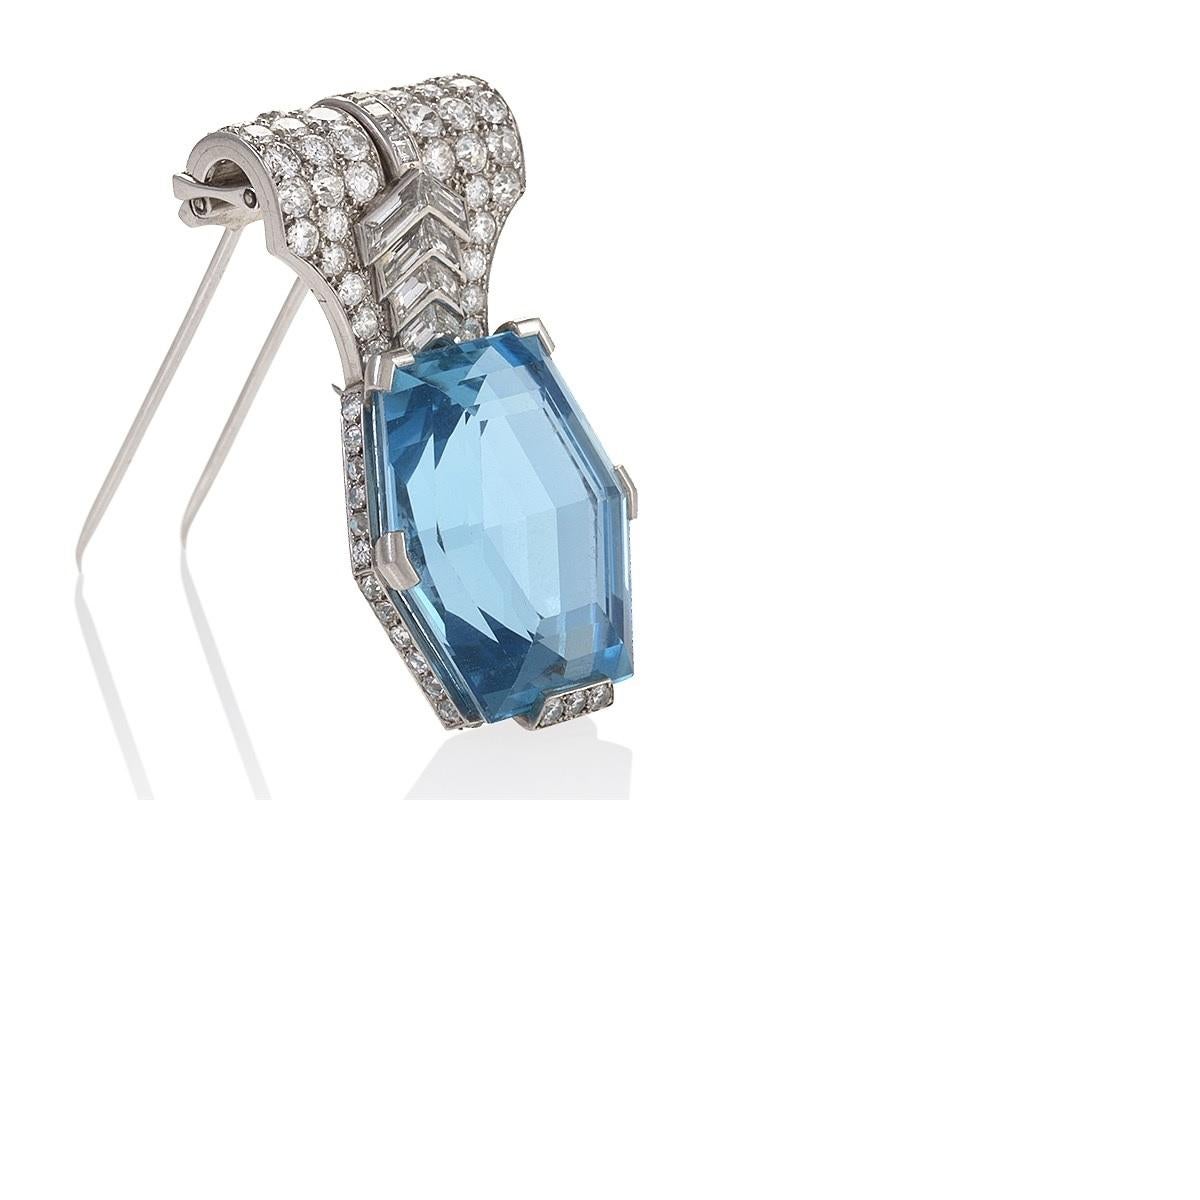 This rare Cartier Paris aquamarine brooch with its bold diamond chevron patterning dates from the 1930s, when designers created a dynamic series of jewels that featured these limpid blue gems from Brazil. Set in minimal platinum, the aquamarines’